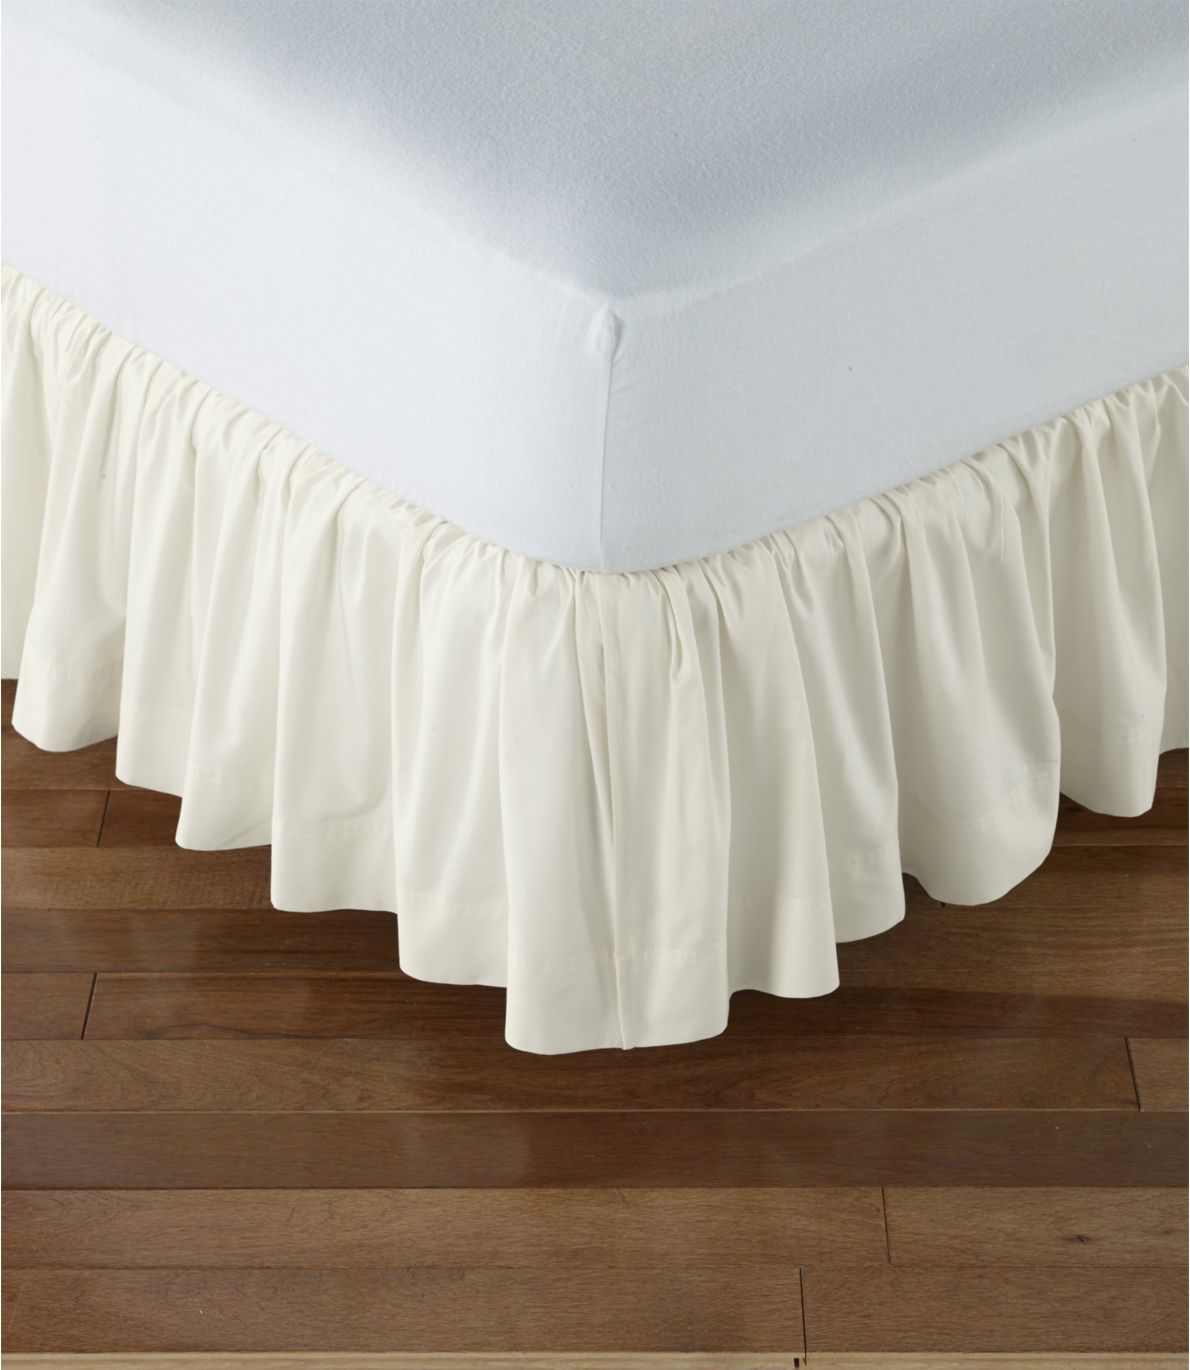 Gathered Cotton Bed Skirt